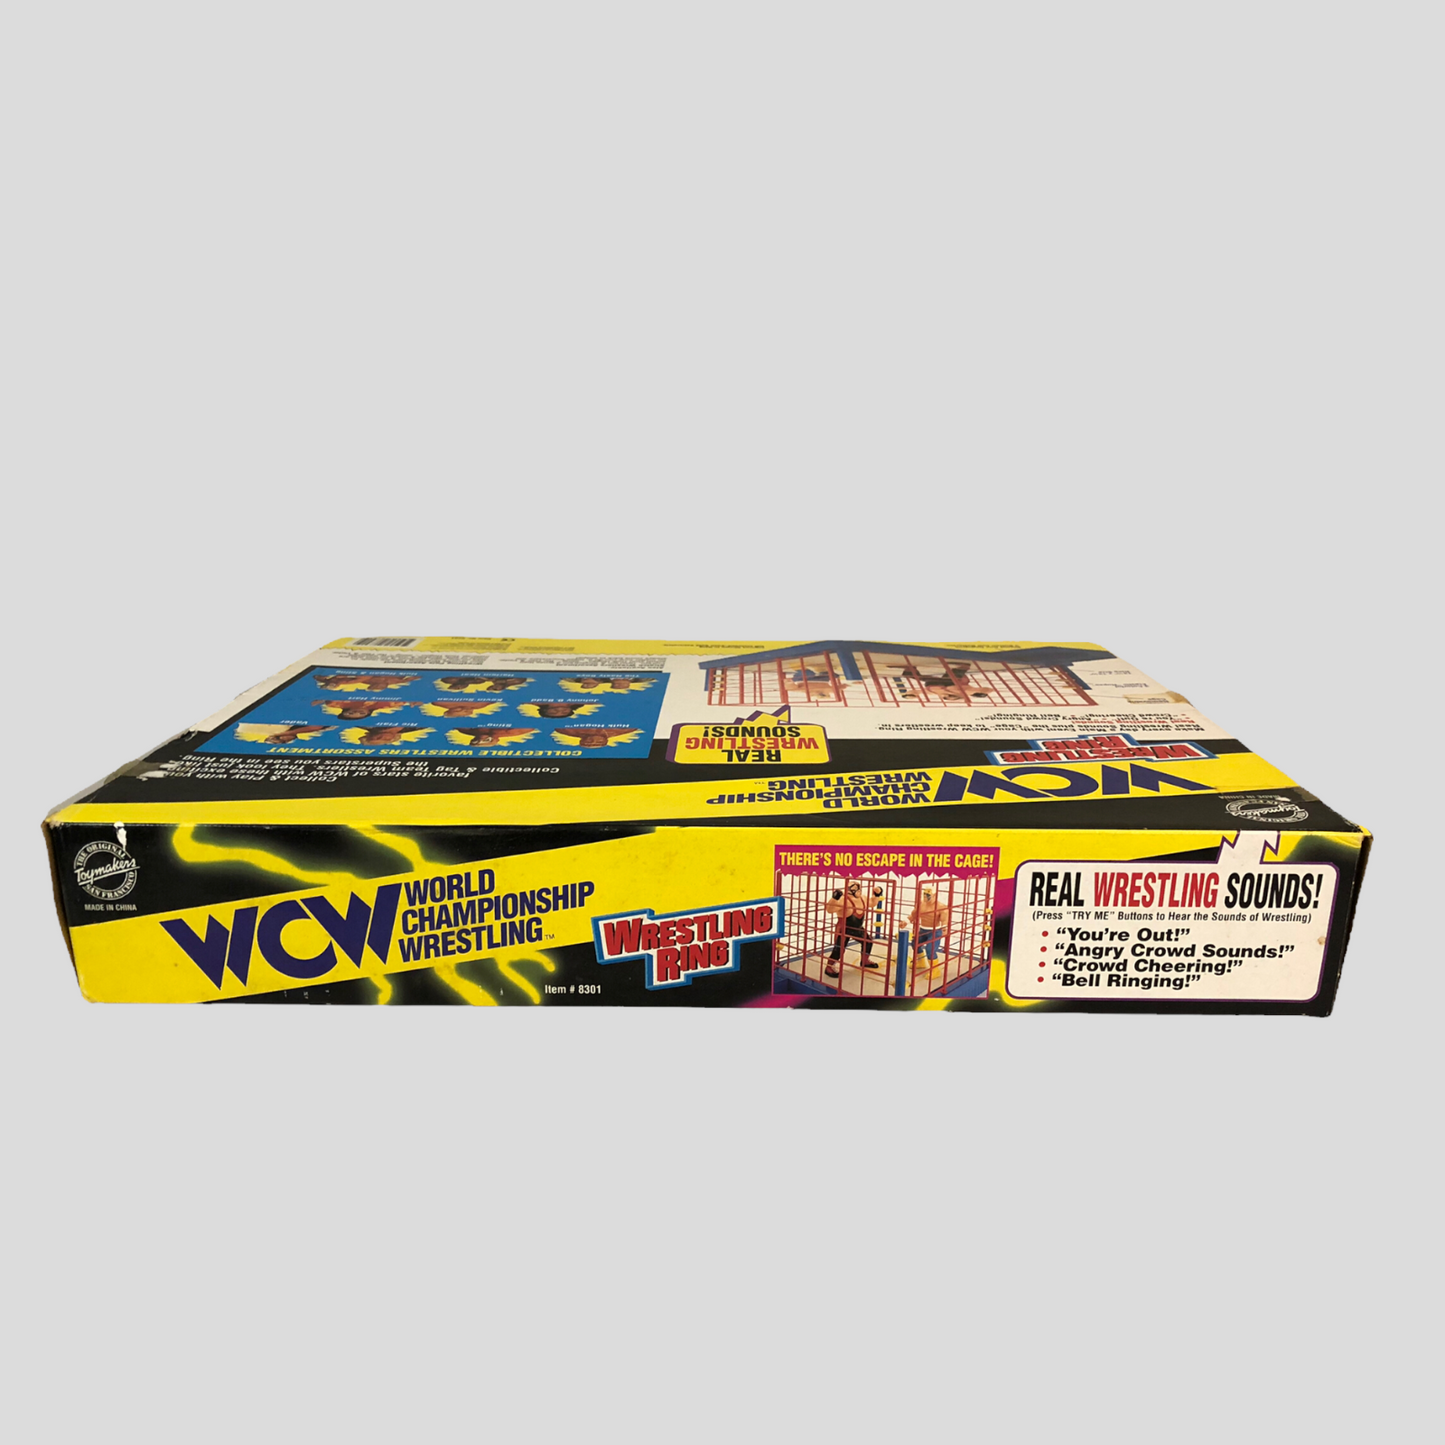 1995 WCW OSFTM Collectible Wrestlers [LJN Style] Wrestling Ring